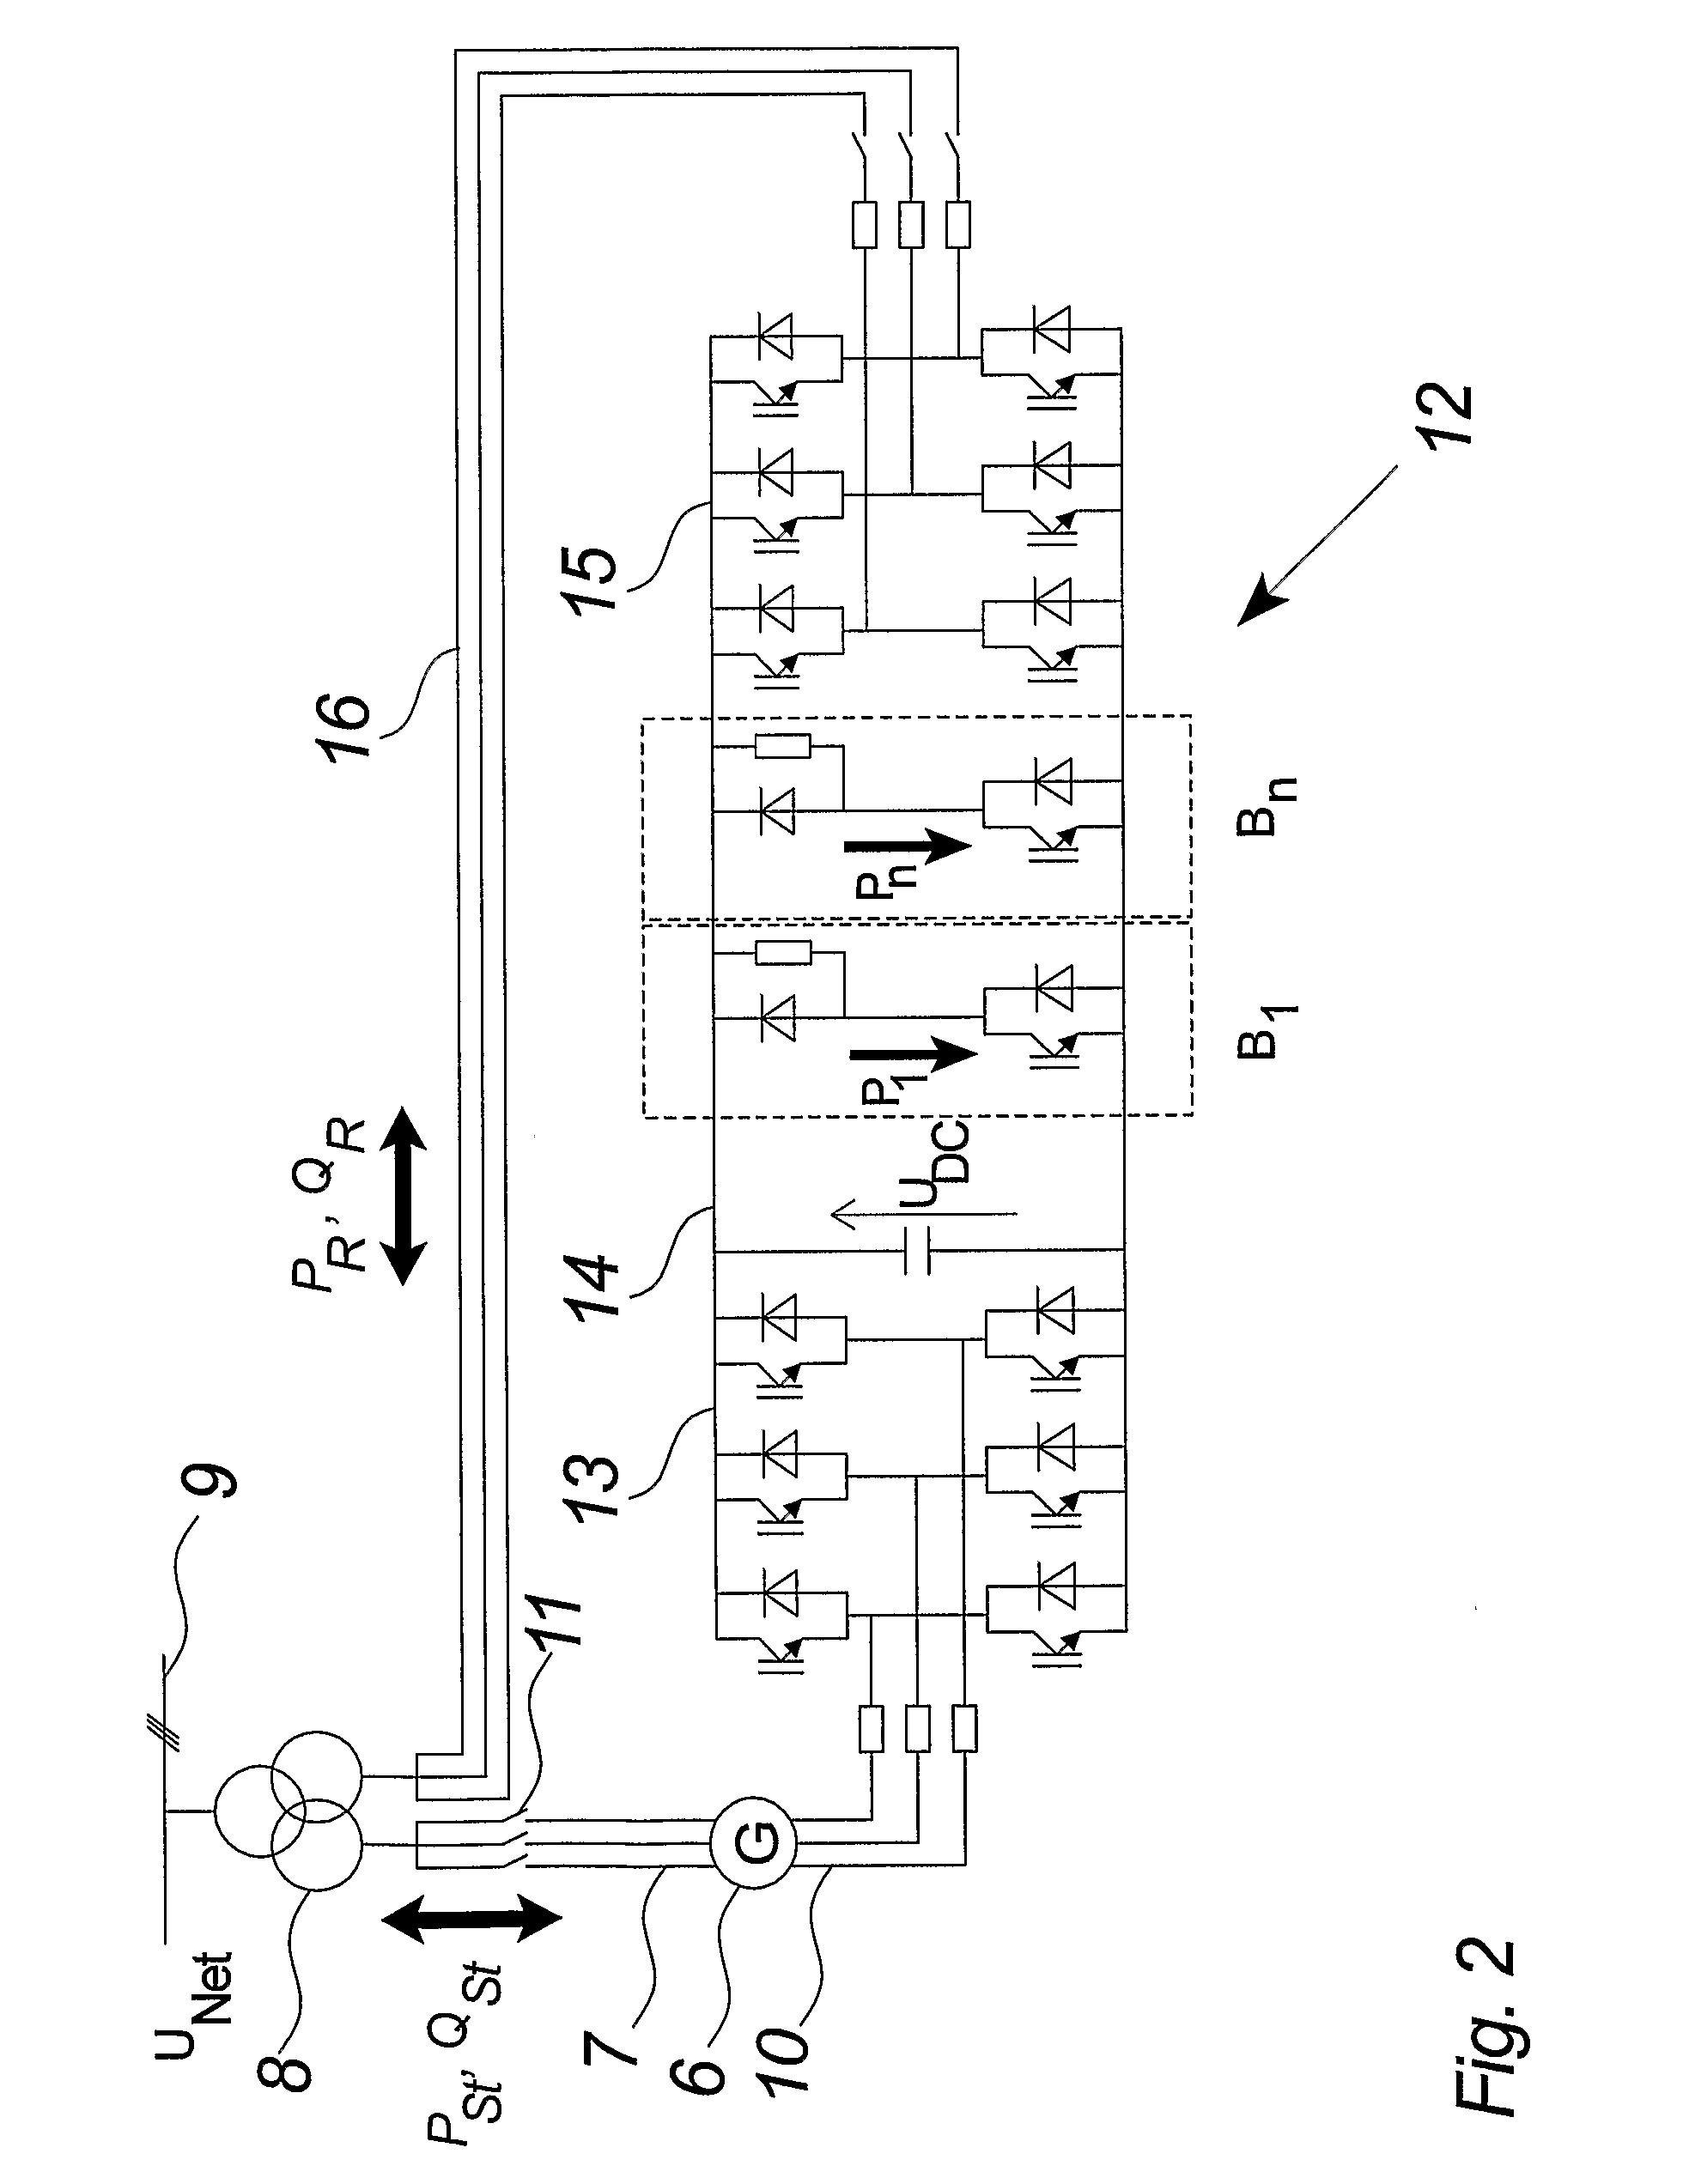 Method of controlling a wind turbine connected to an electric utility grid